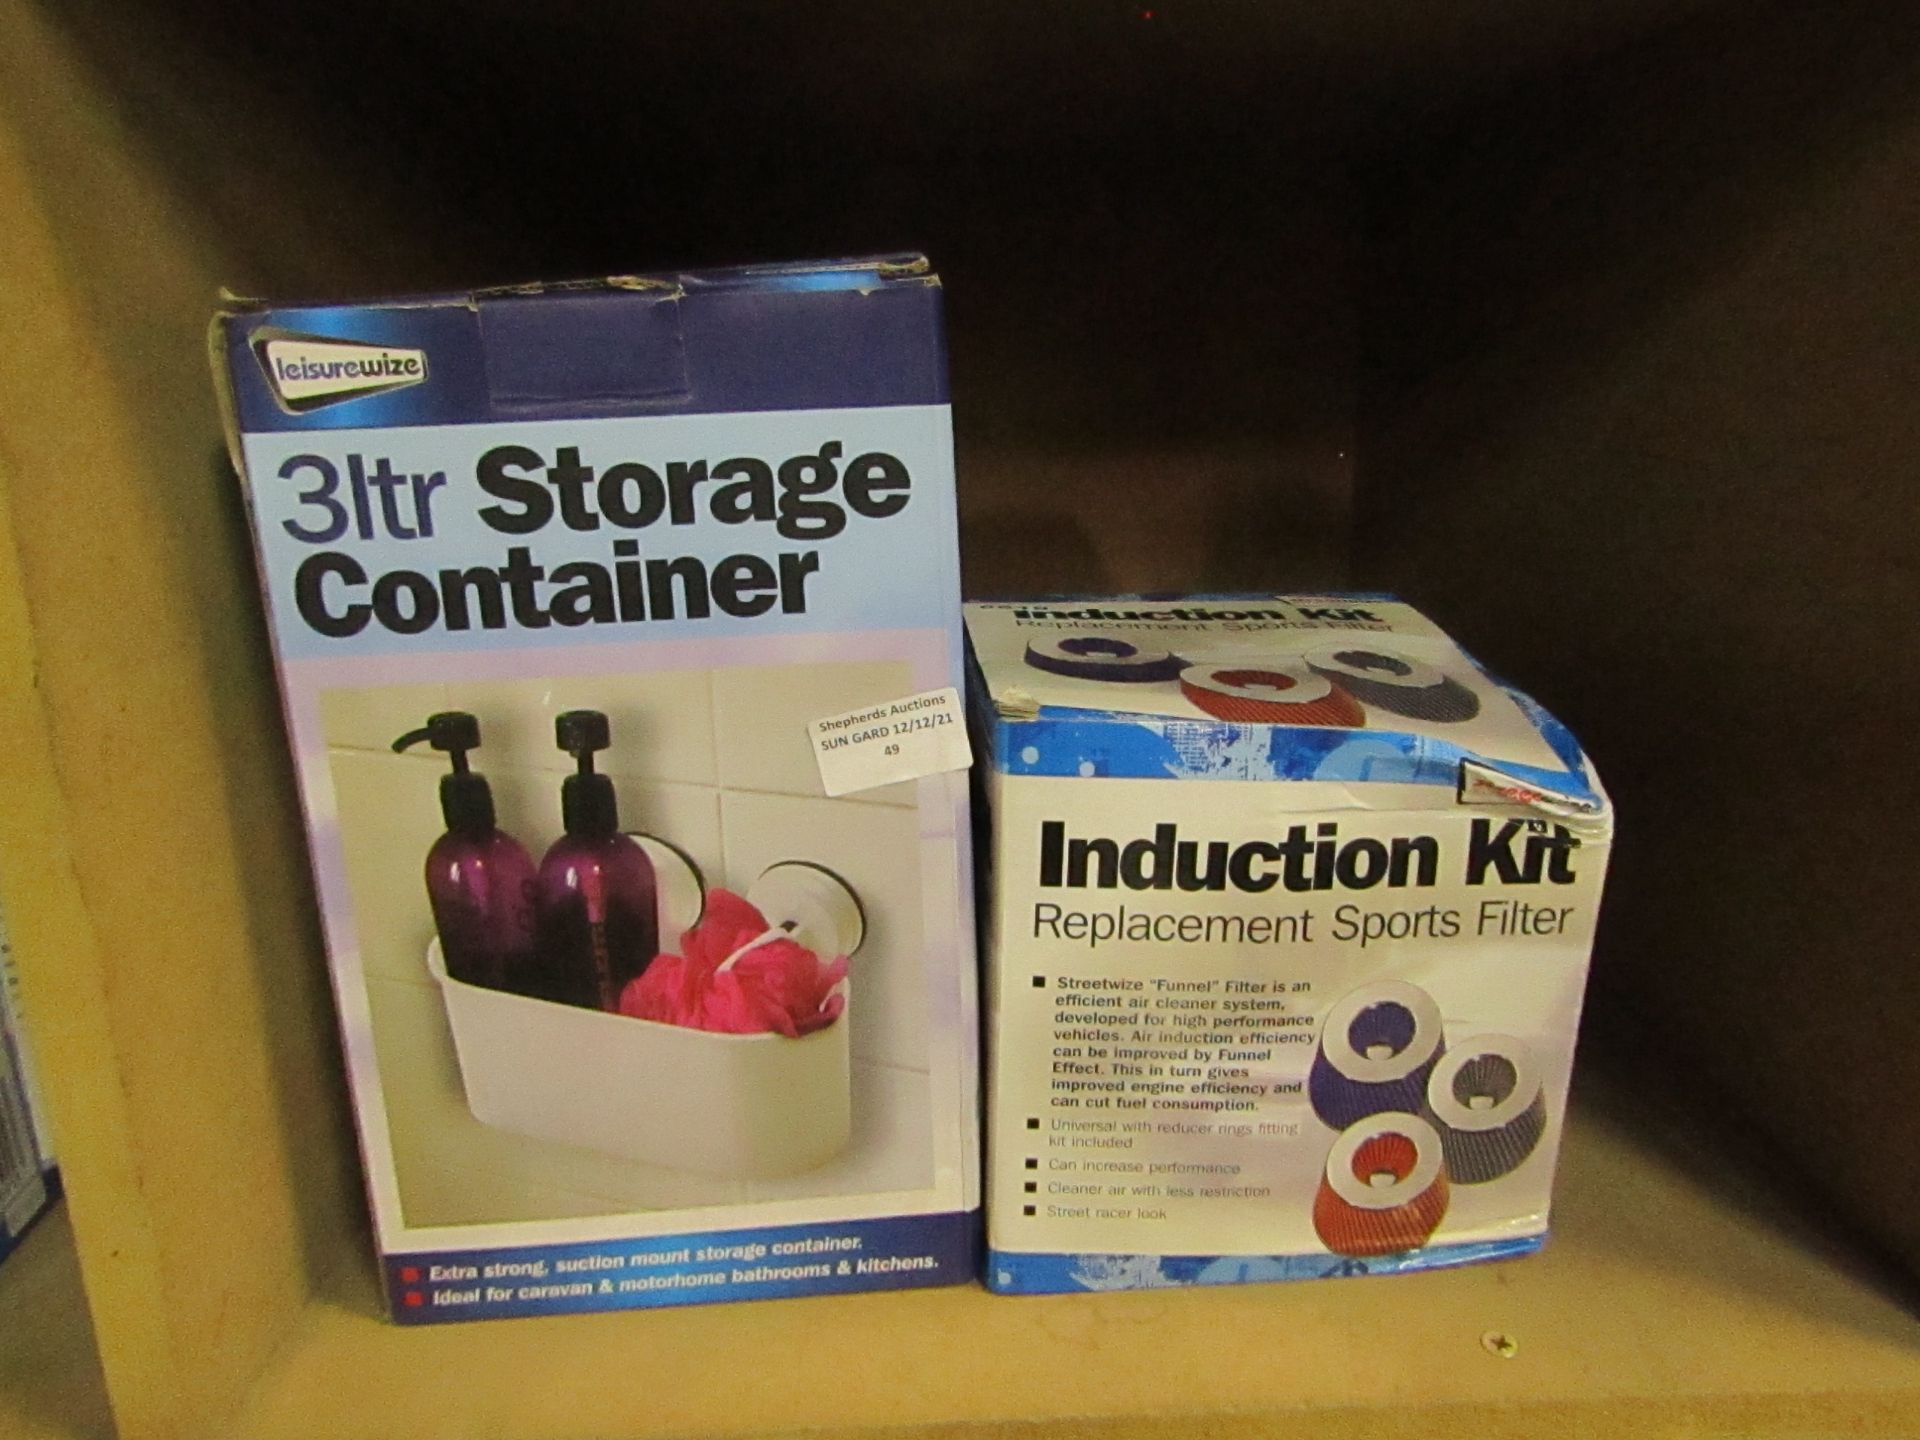 2x Items Being Streetwize/Leisurewize, 1x 3Ltr Storage Container, 1x Induction Kit Replacement